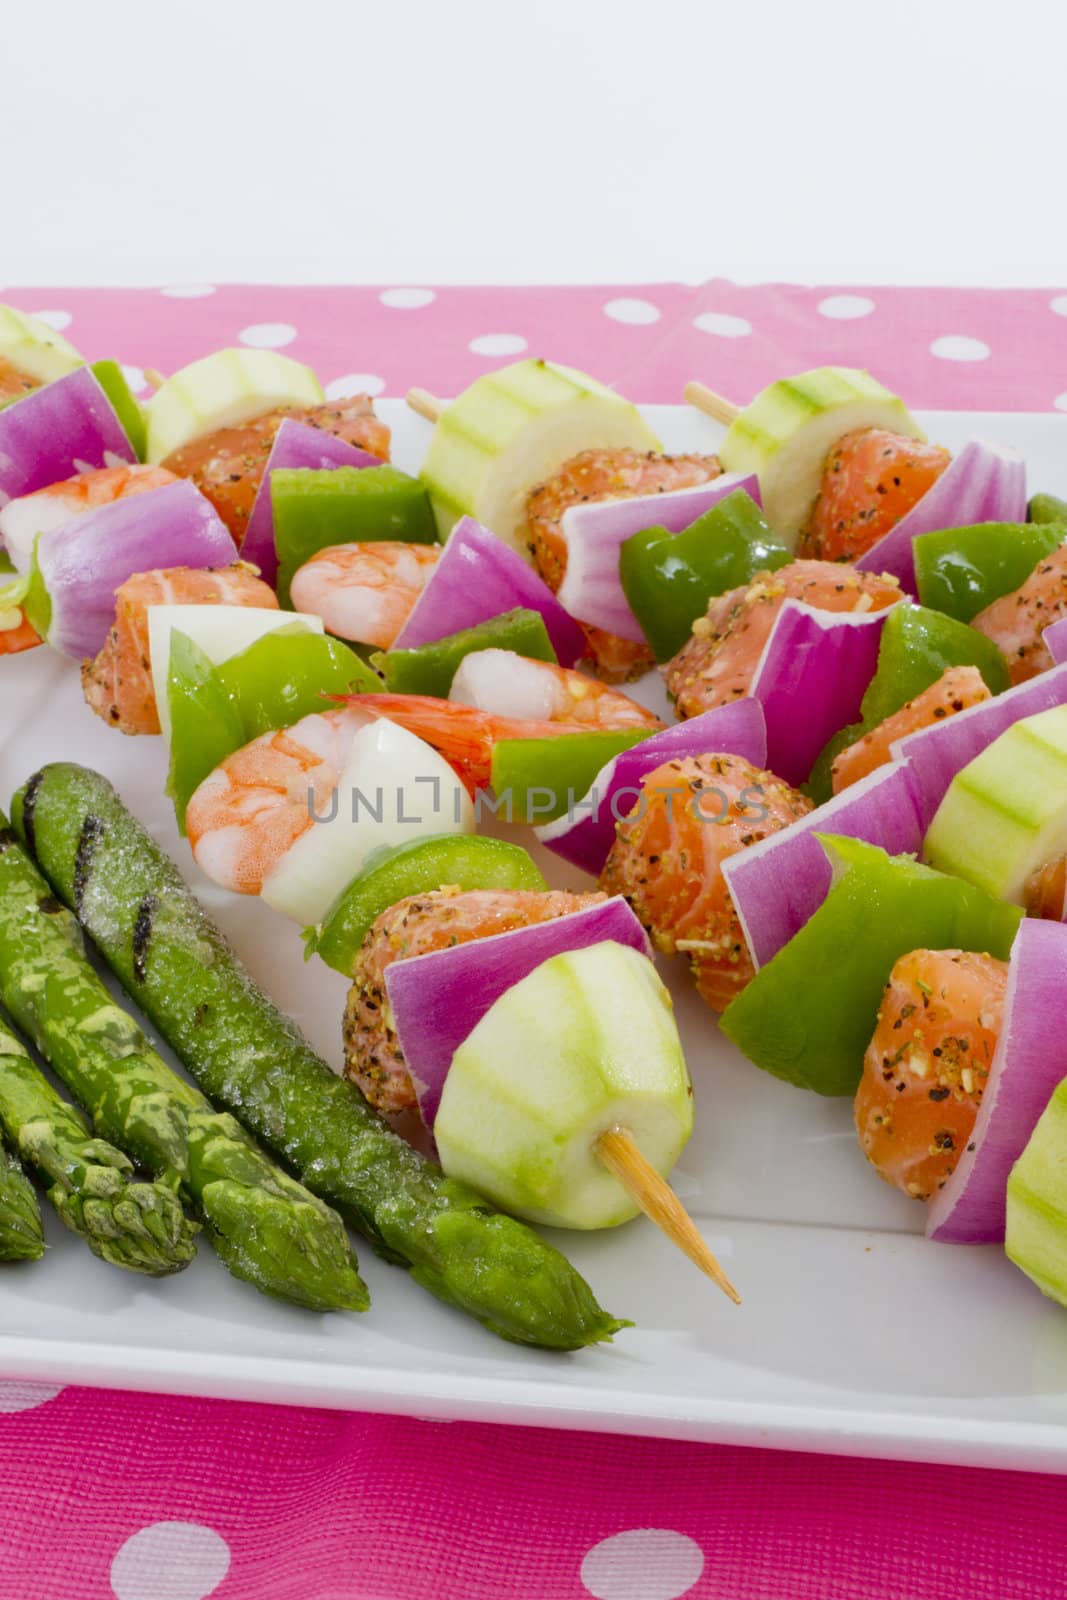 Seafood Skewers are Ready to go on the barbecue. by coskun